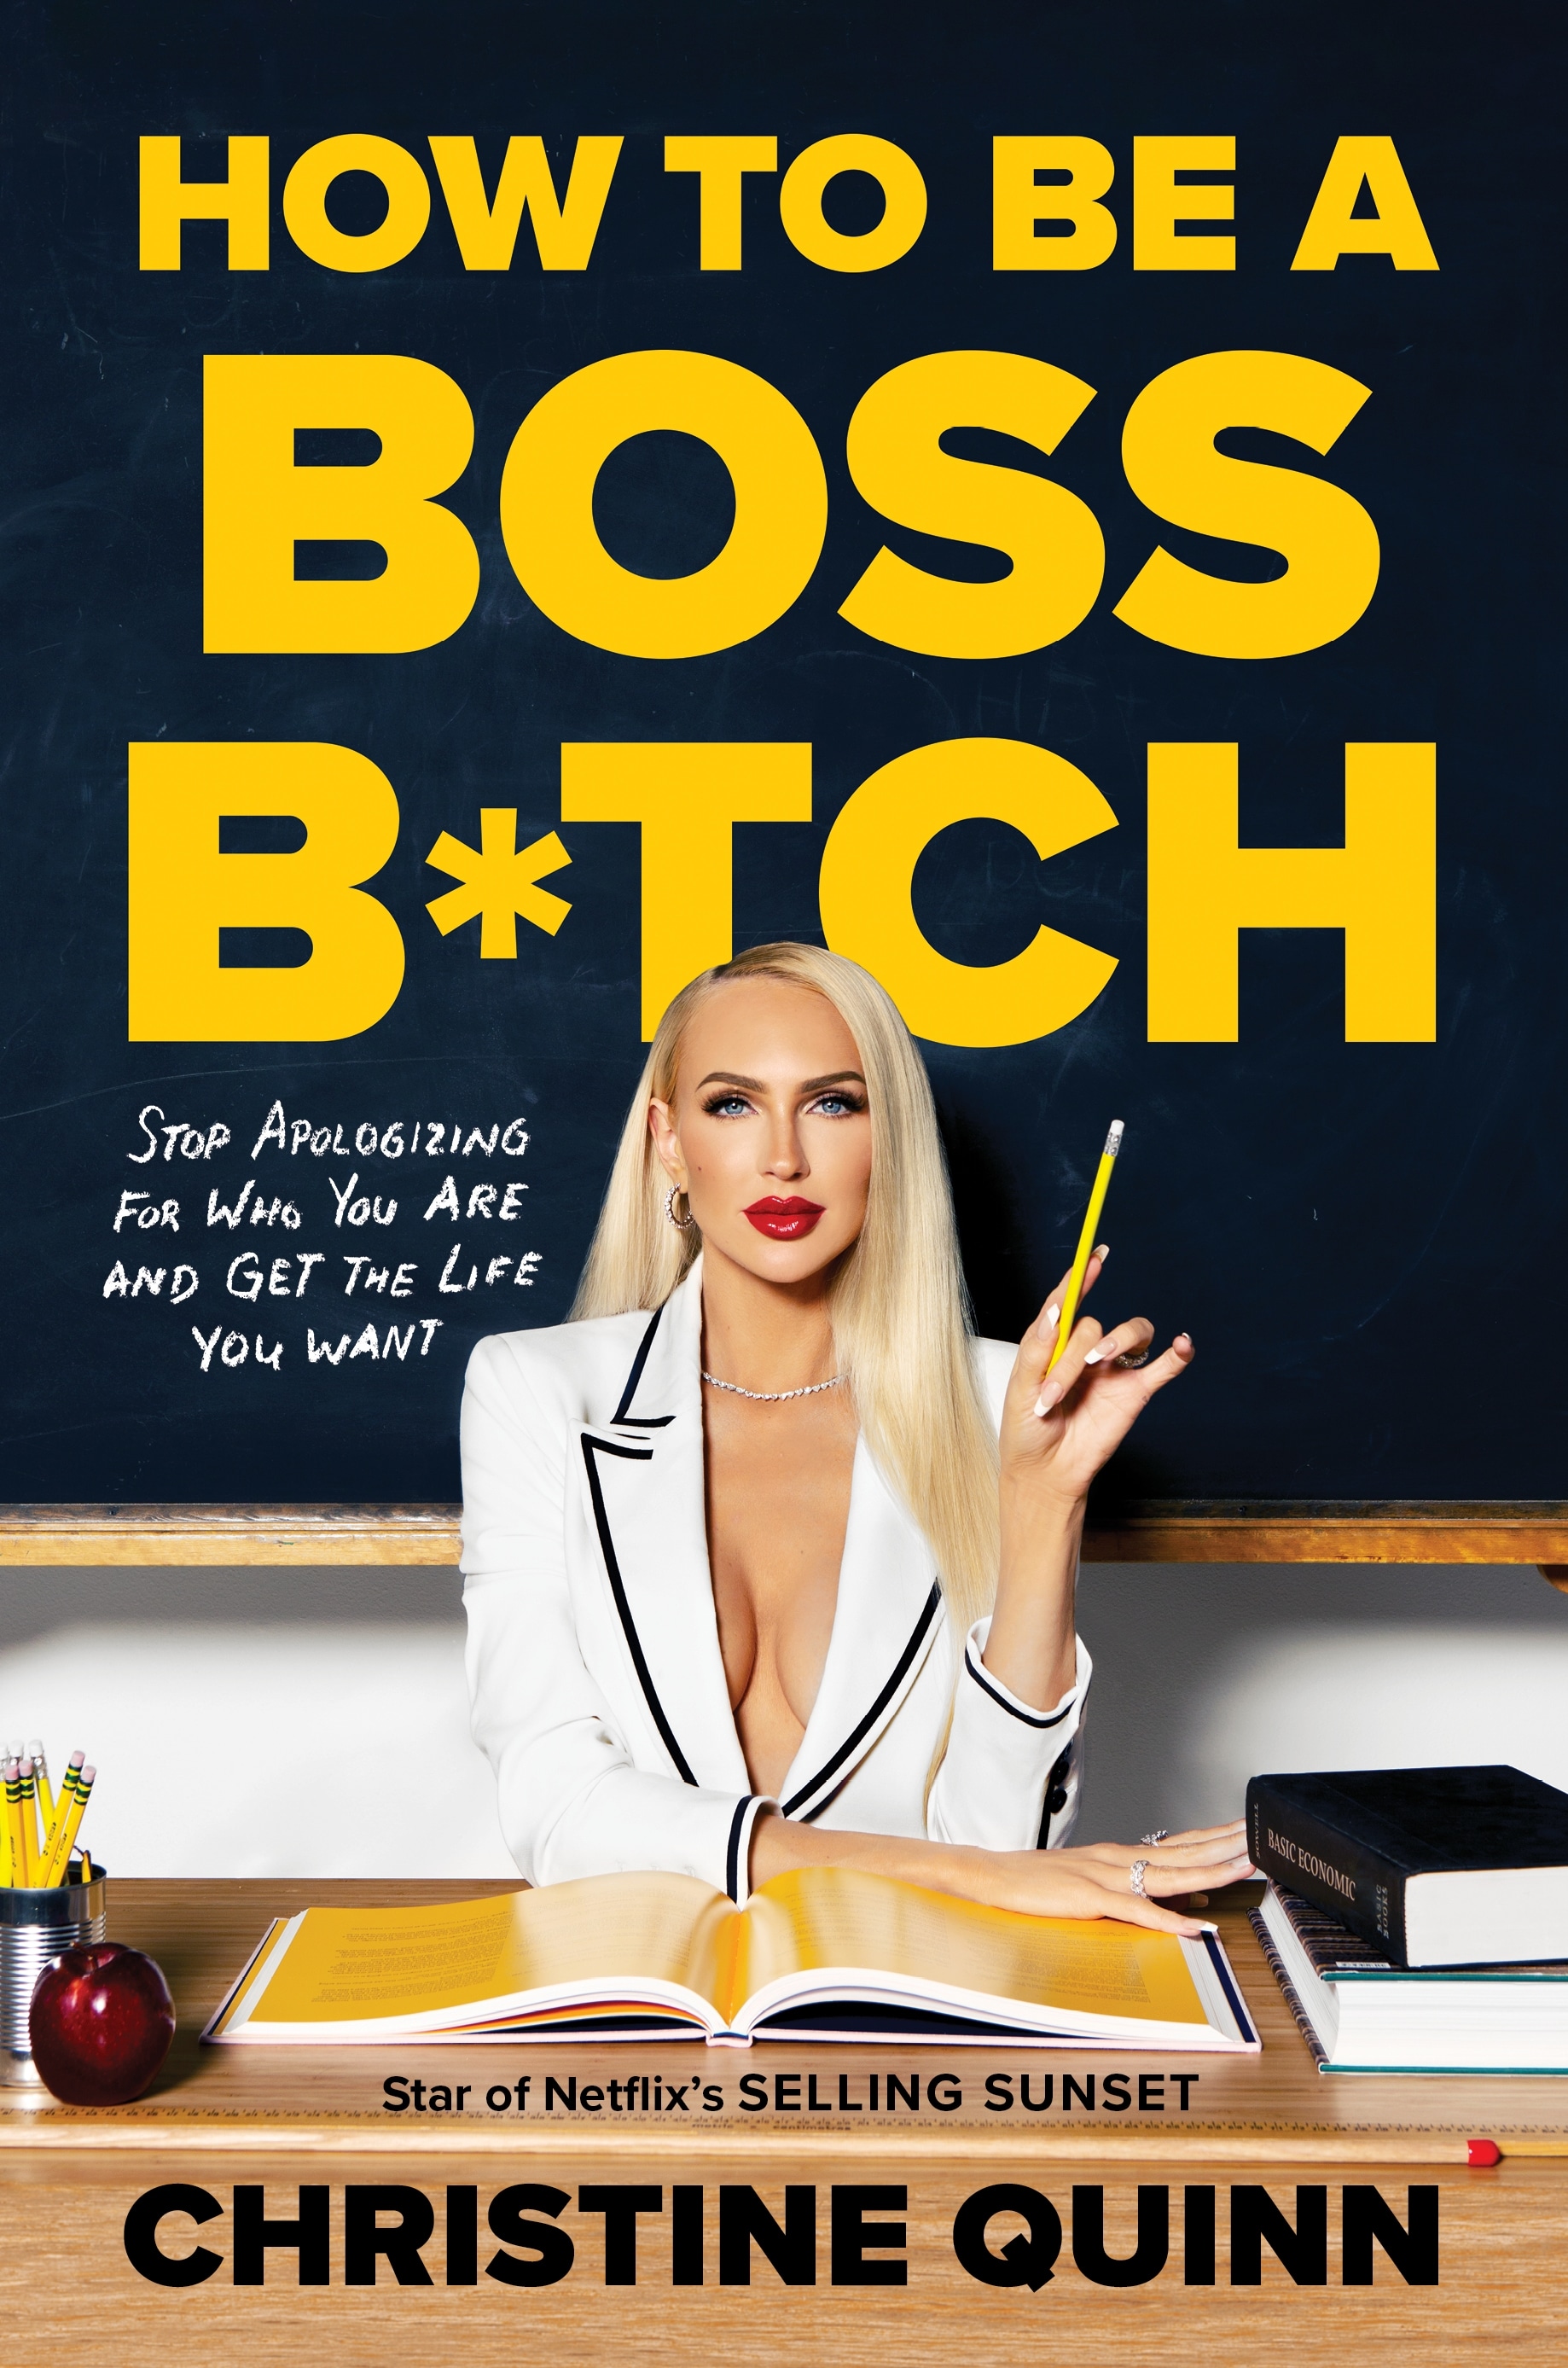 Book “How to be a Boss Bitch” by Christine Quinn — May 19, 2022